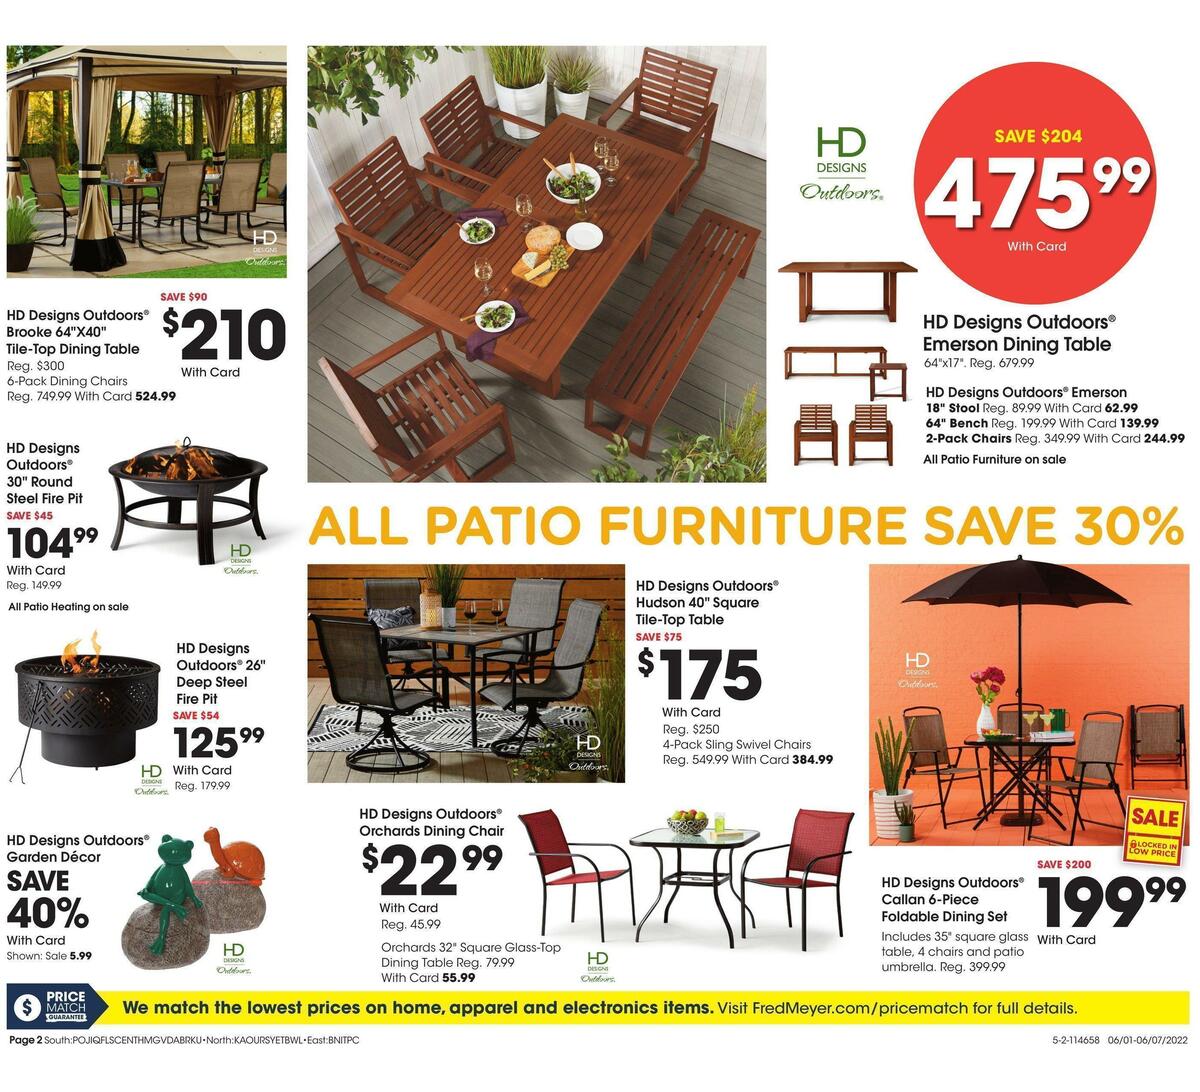 Fred Meyer General Merchandise Weekly Ad from June 1